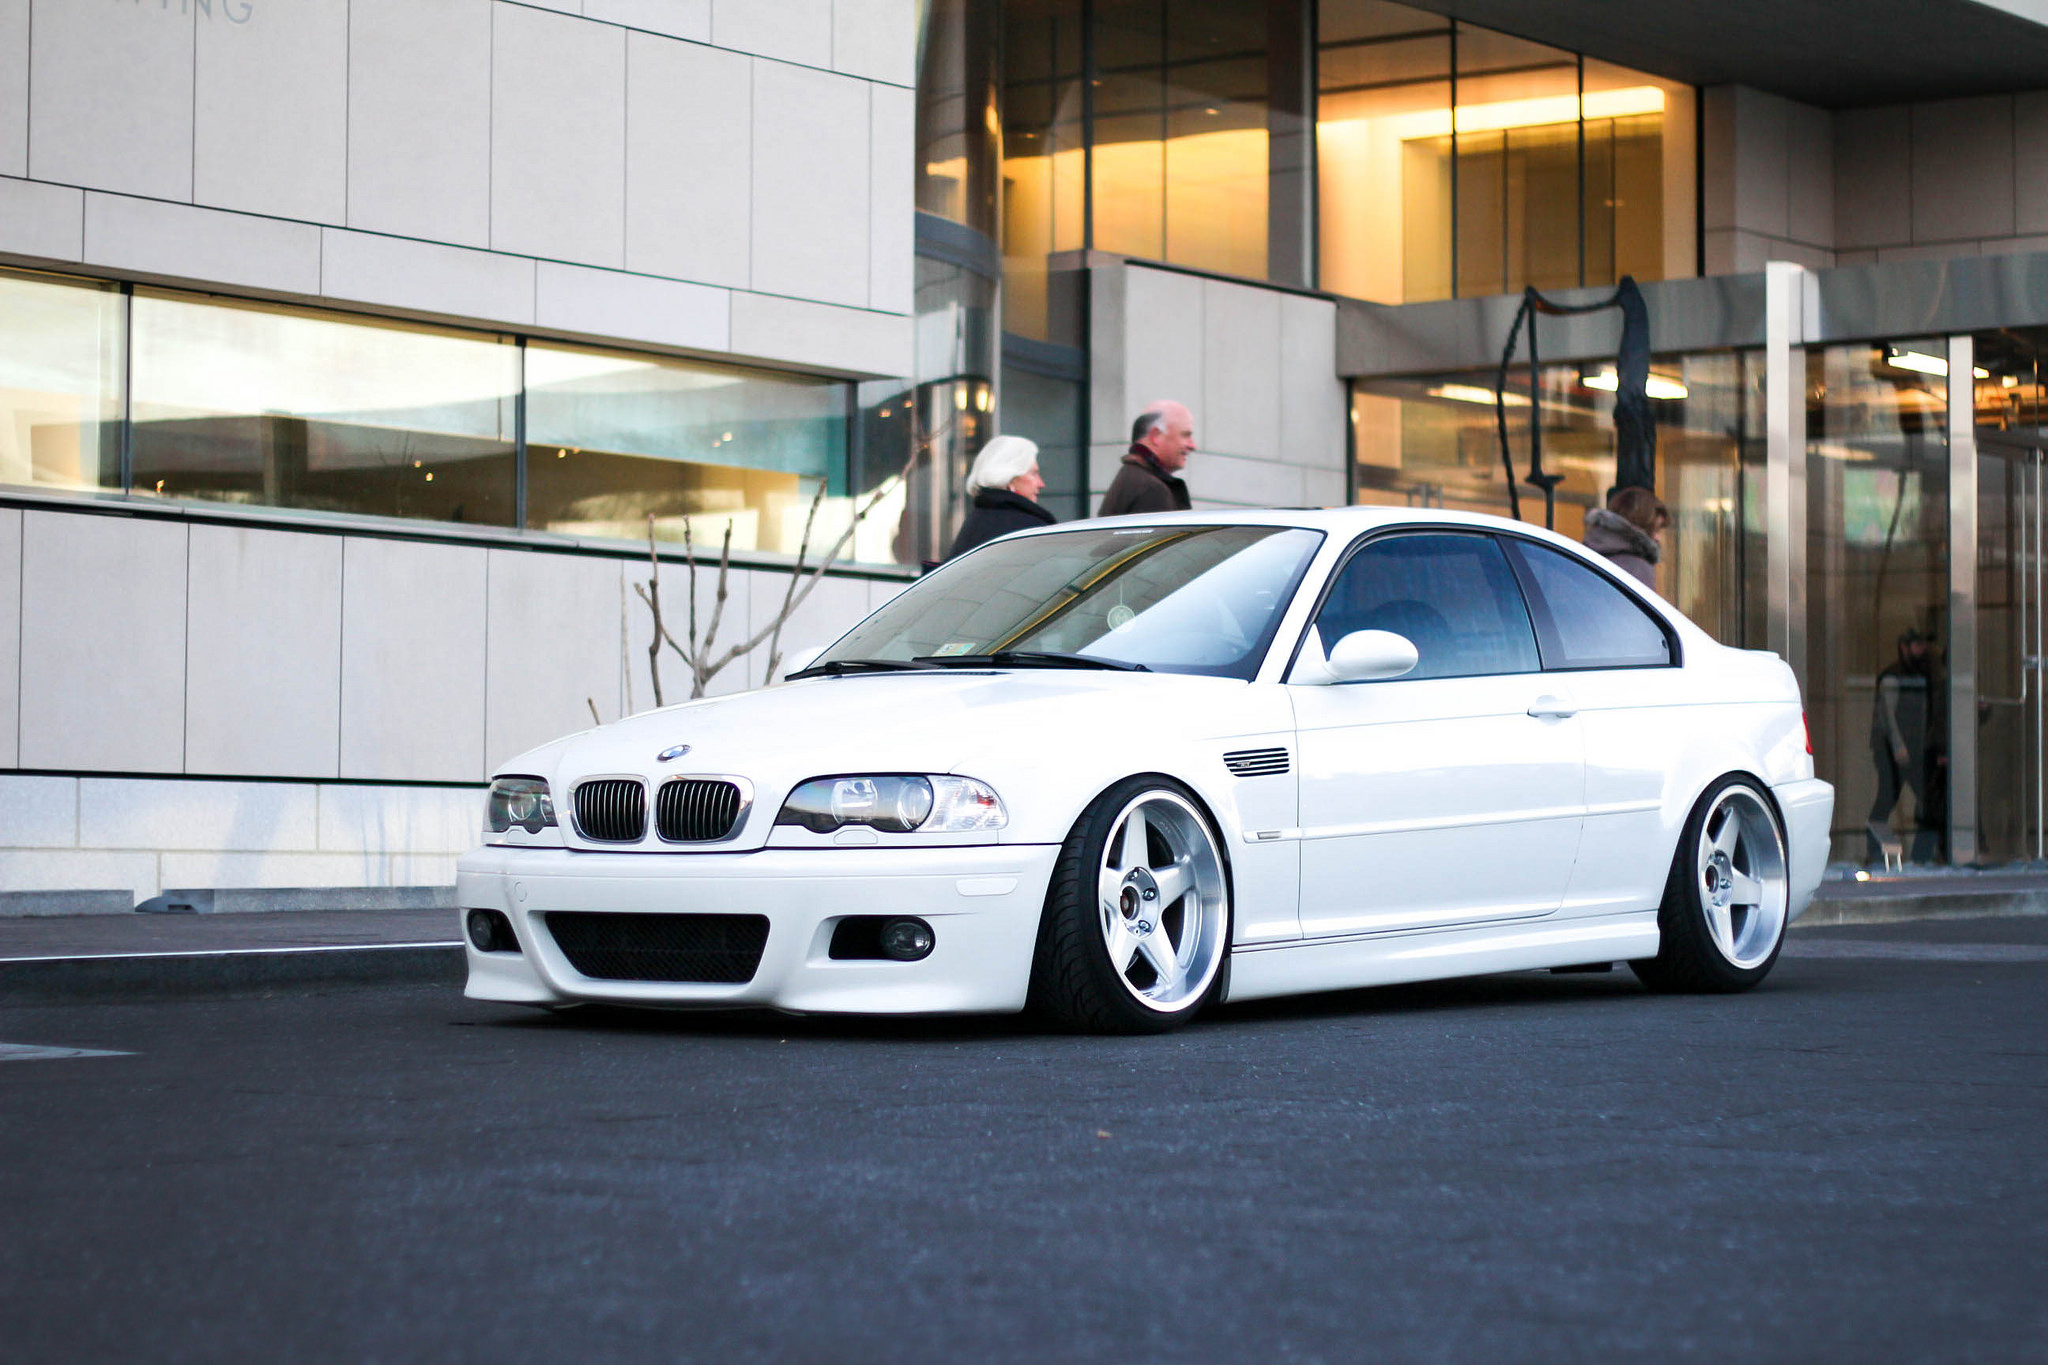 136576 download wallpaper bmw, cars, white, side view, e46, m3 screensavers and pictures for free